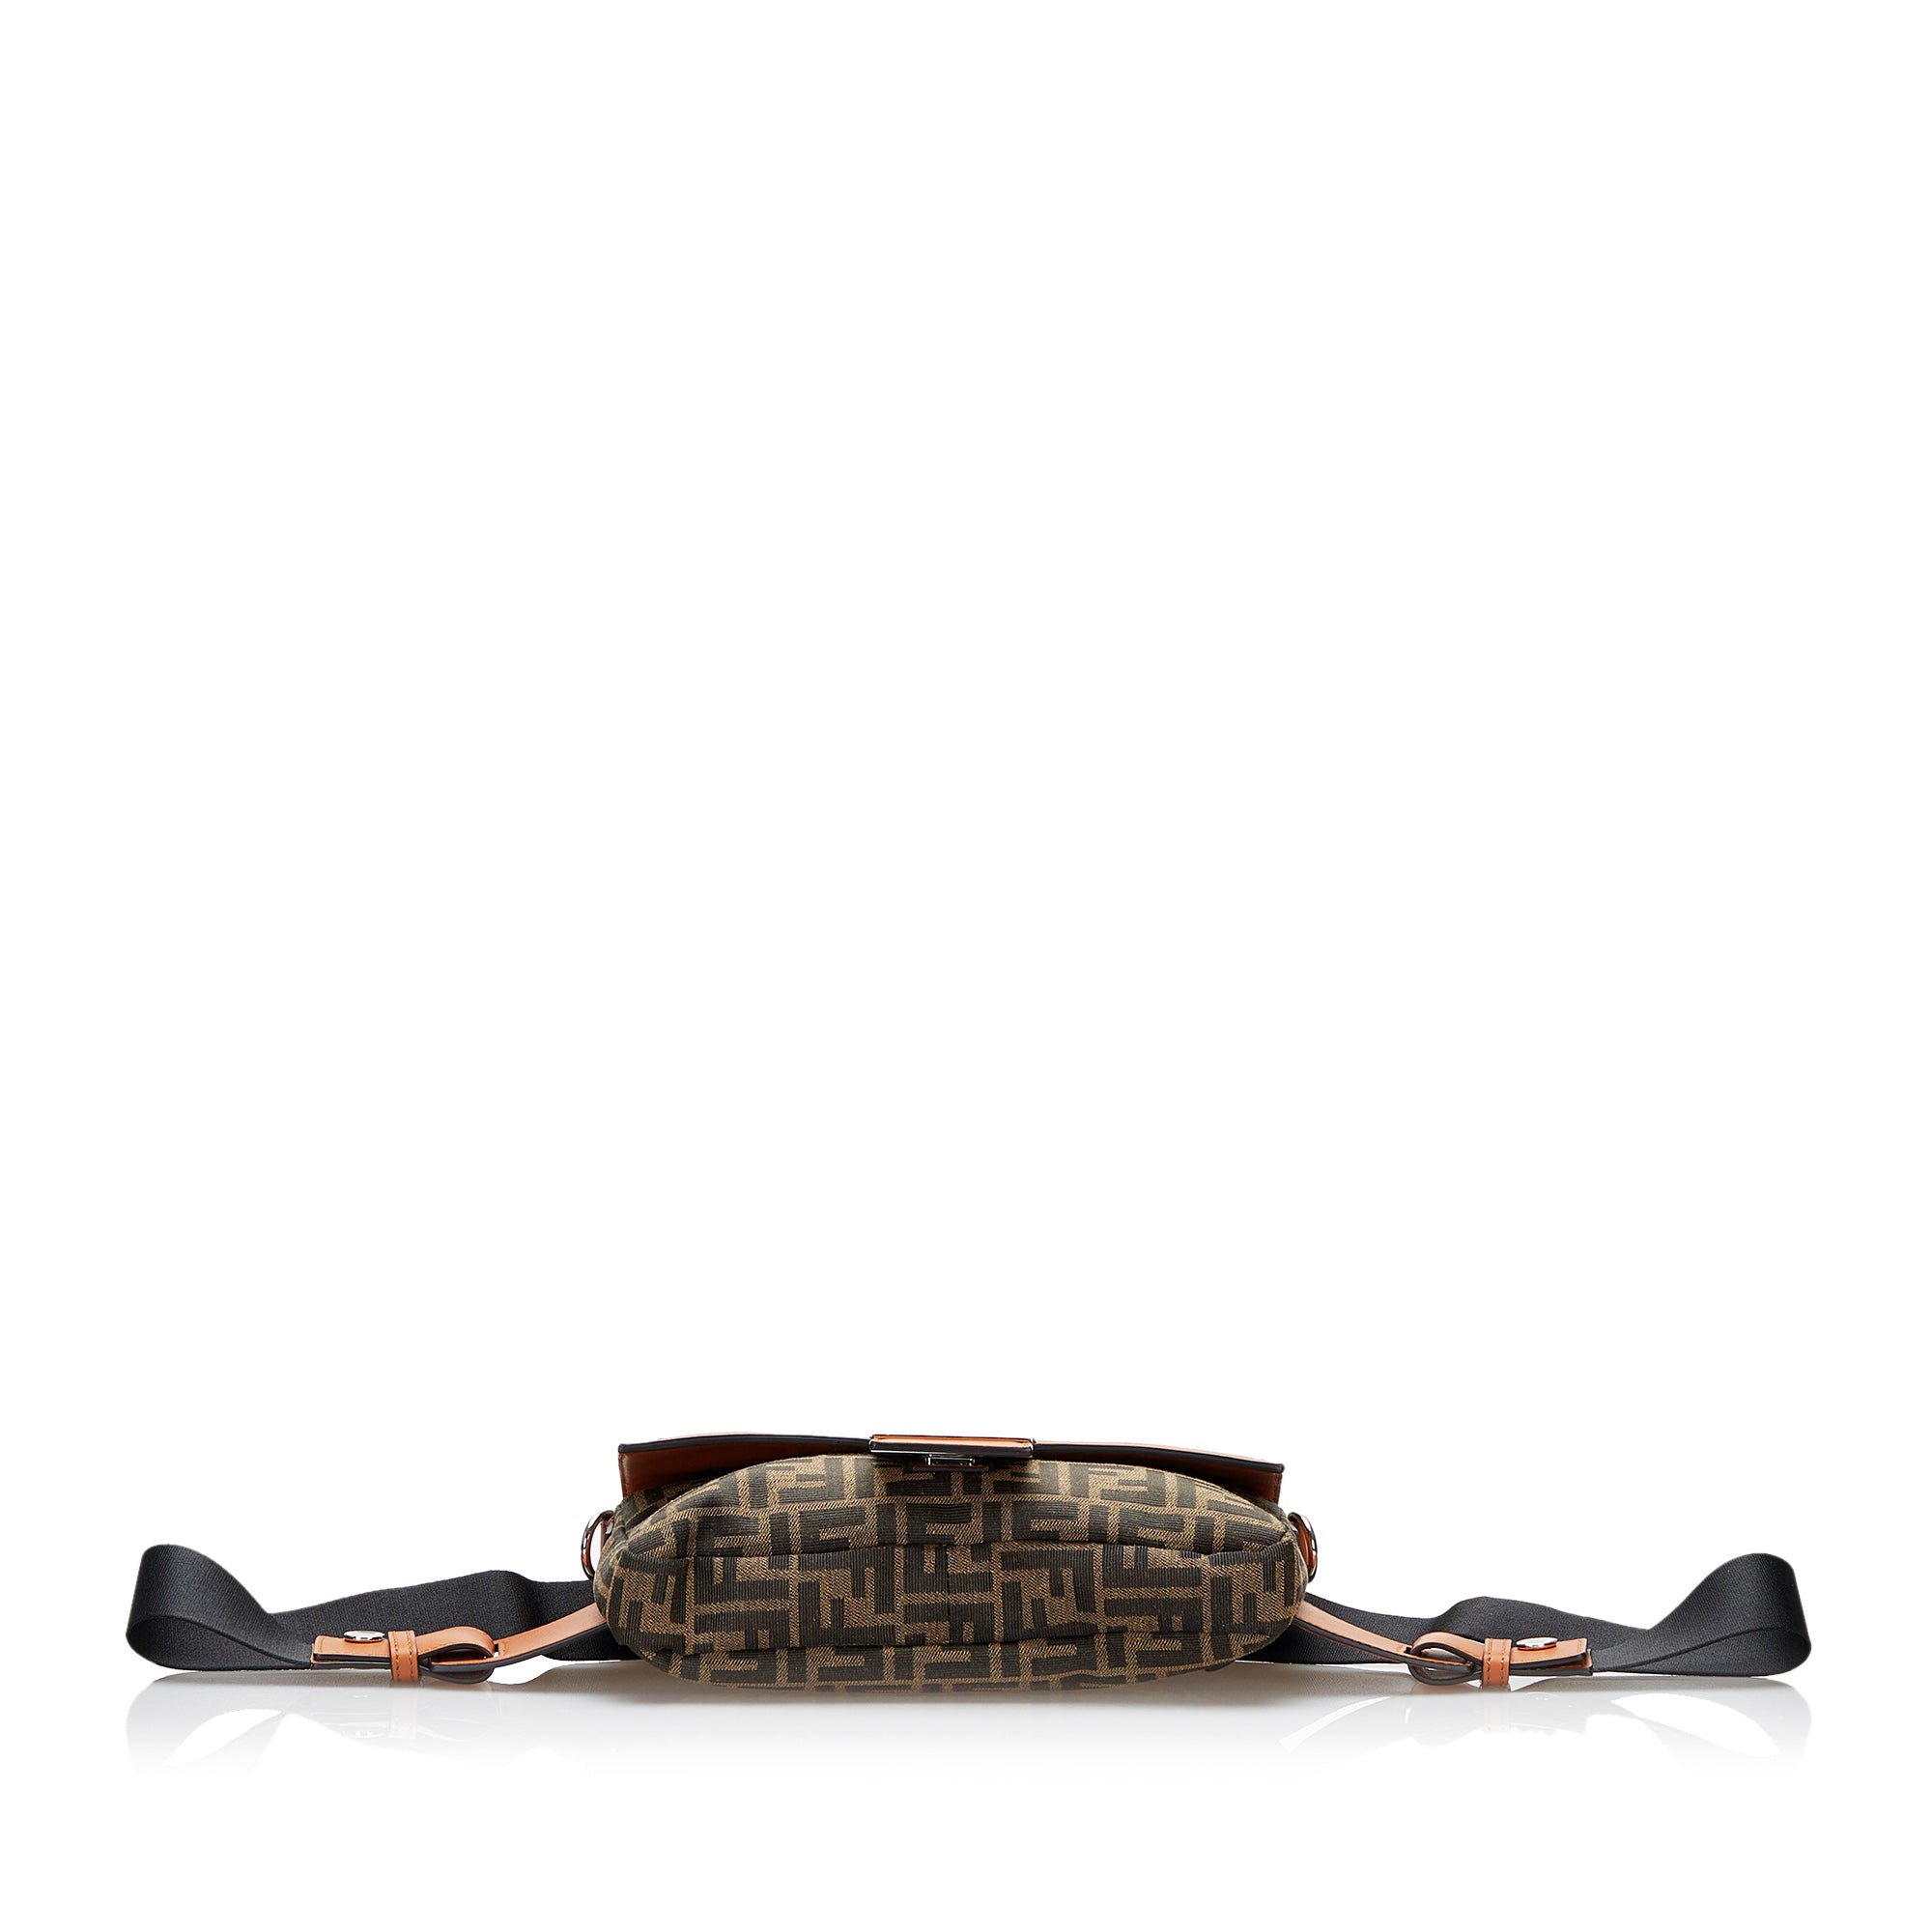 Fendi Baguette Convertible Belt Bag Zucca Canvas with Canvas and Leather  Medium - ShopStyle